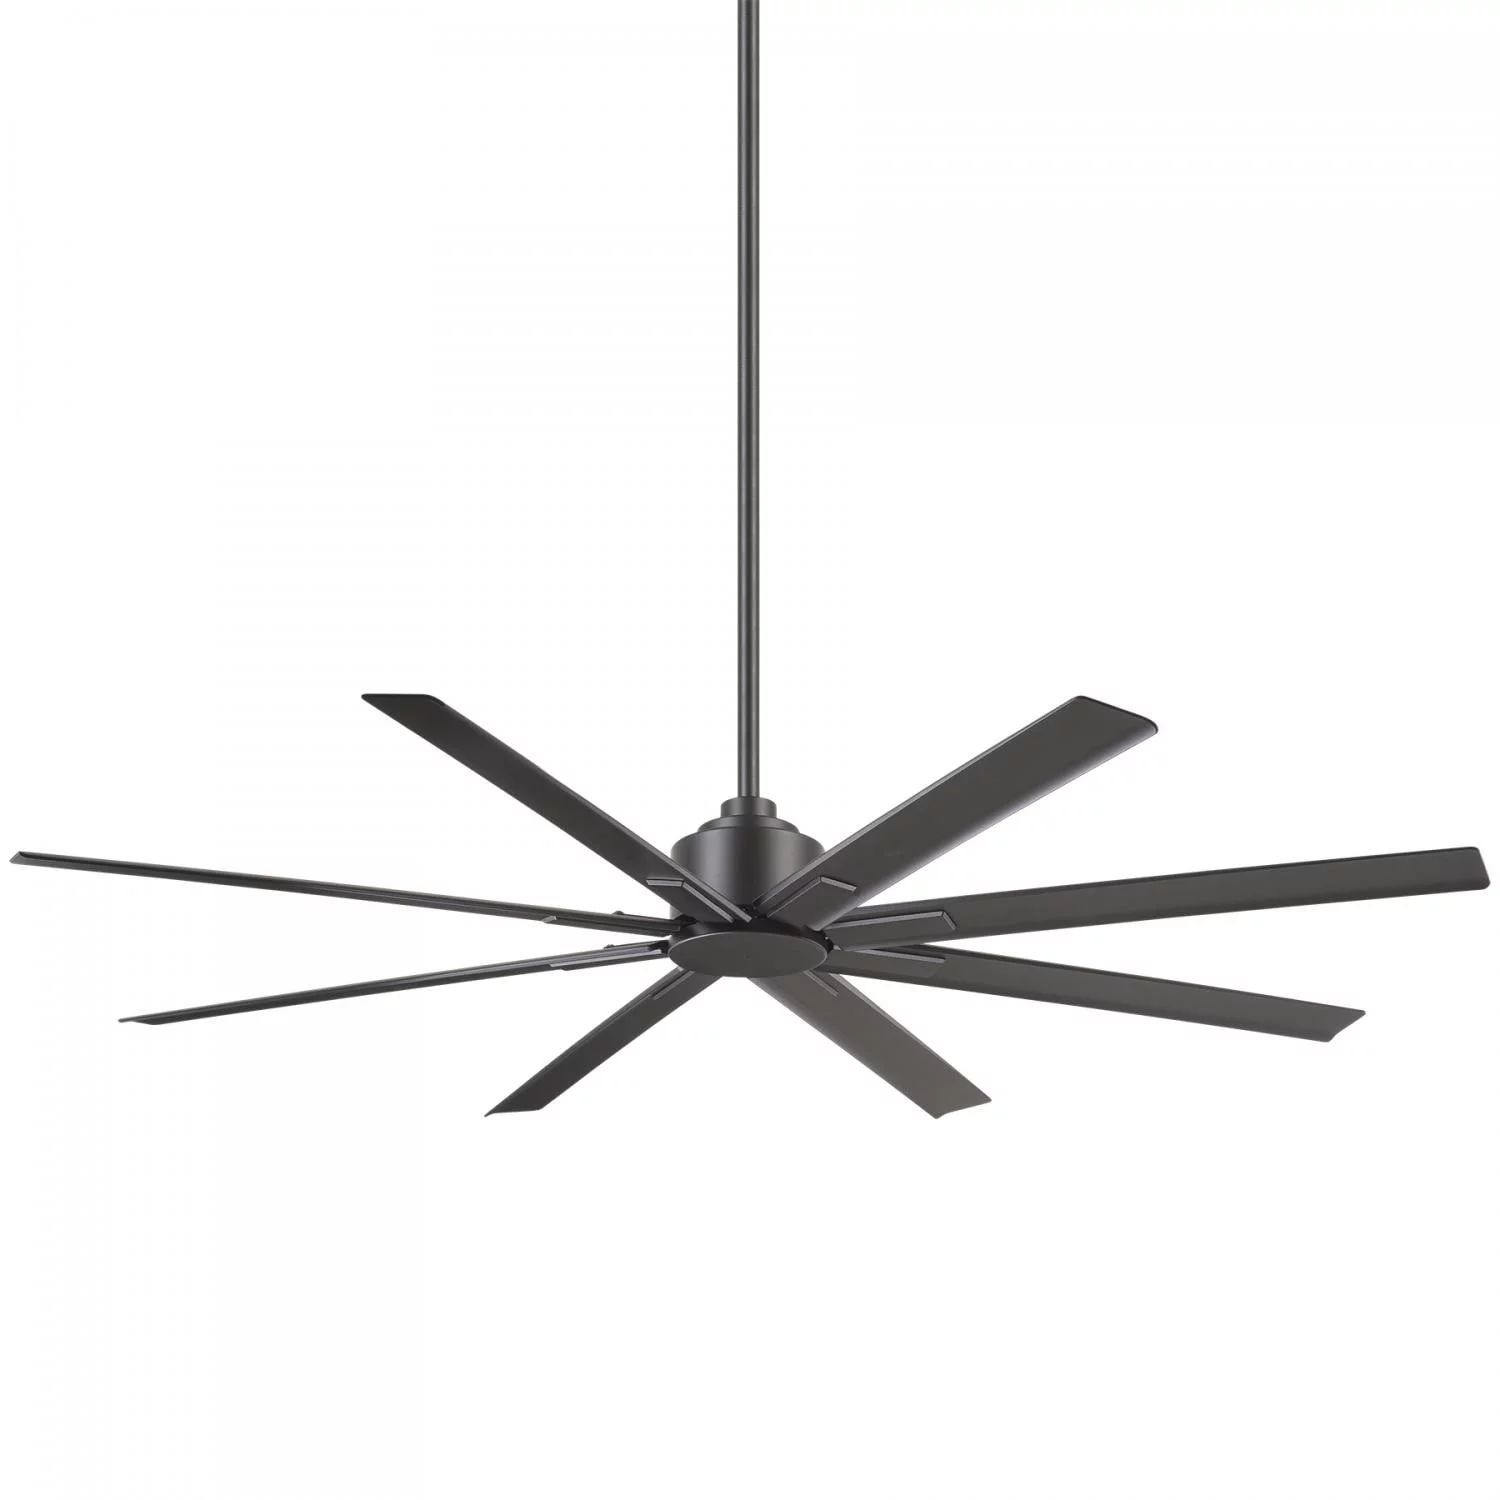 Minkaaire Xtreme H2o 65 Xtreme H2o 65" 8 Blade  Indoor / Outdoor Ceiling Fan - Smoked Iron | Walmart (US)